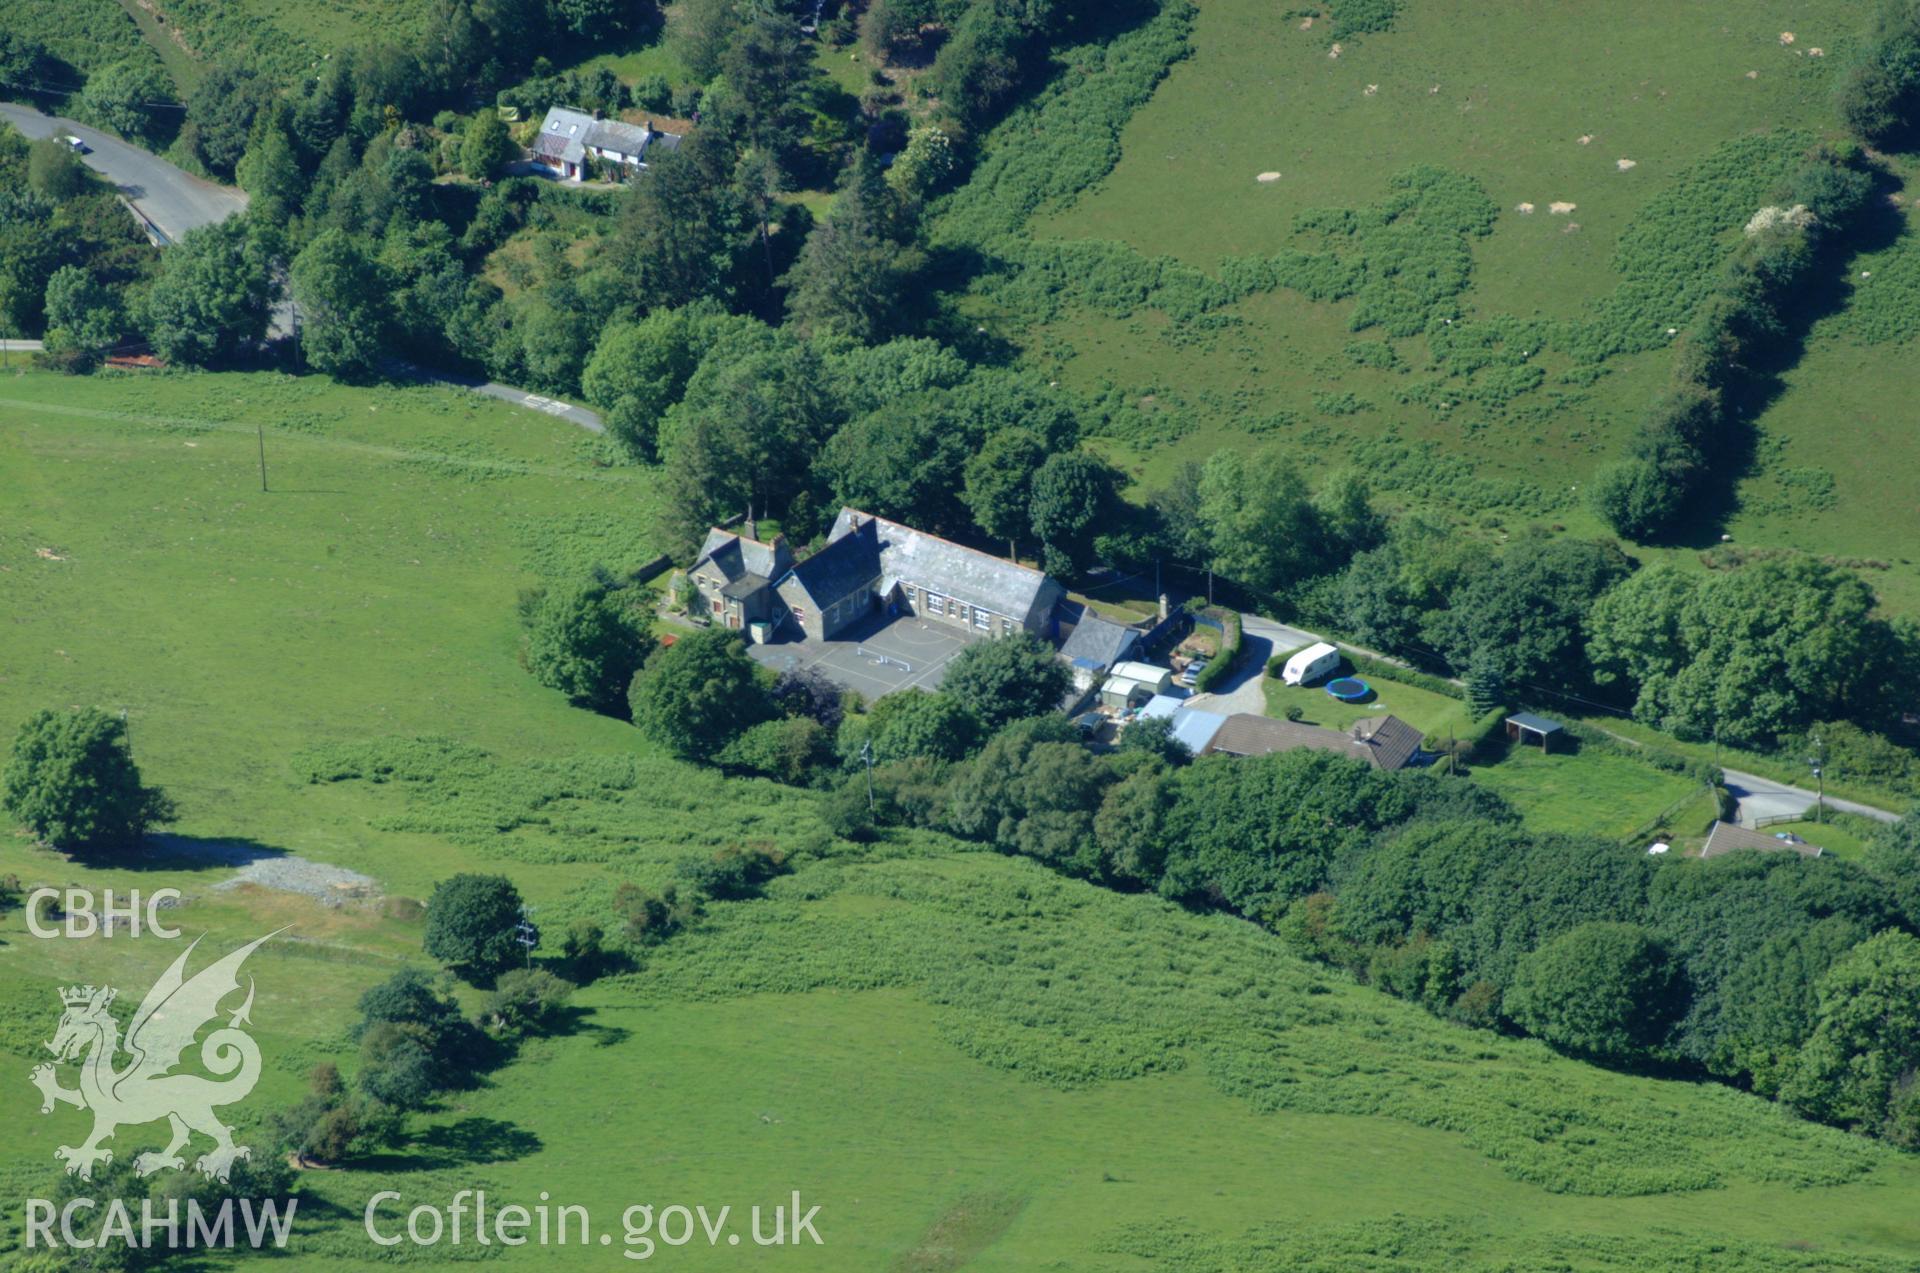 RCAHMW colour oblique aerial photograph of Ysgol Trefeurig taken on 14/06/2004 by Toby Driver